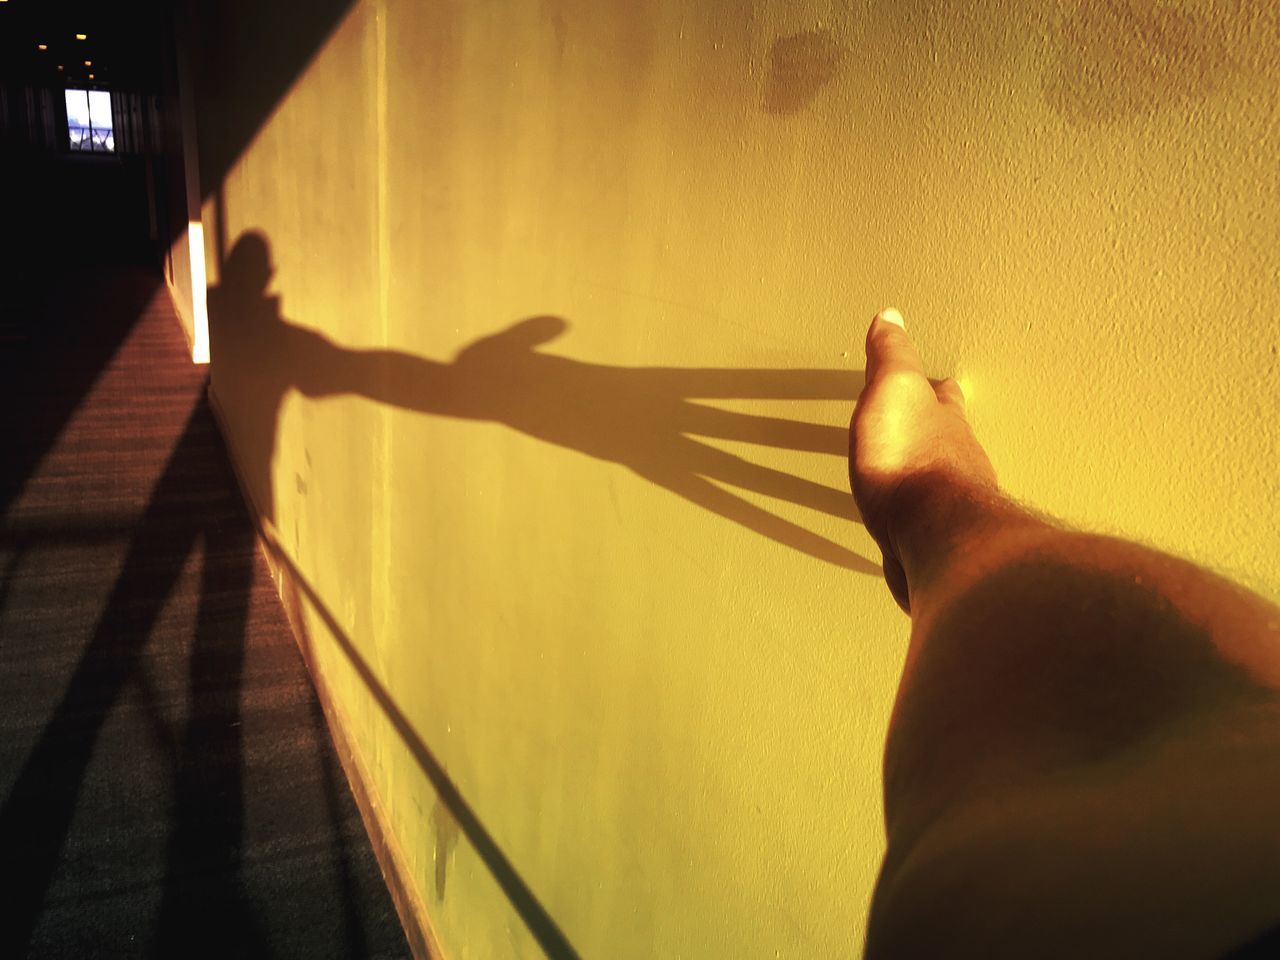 SHADOW OF PEOPLE ON WALL IN SUNLIGHT